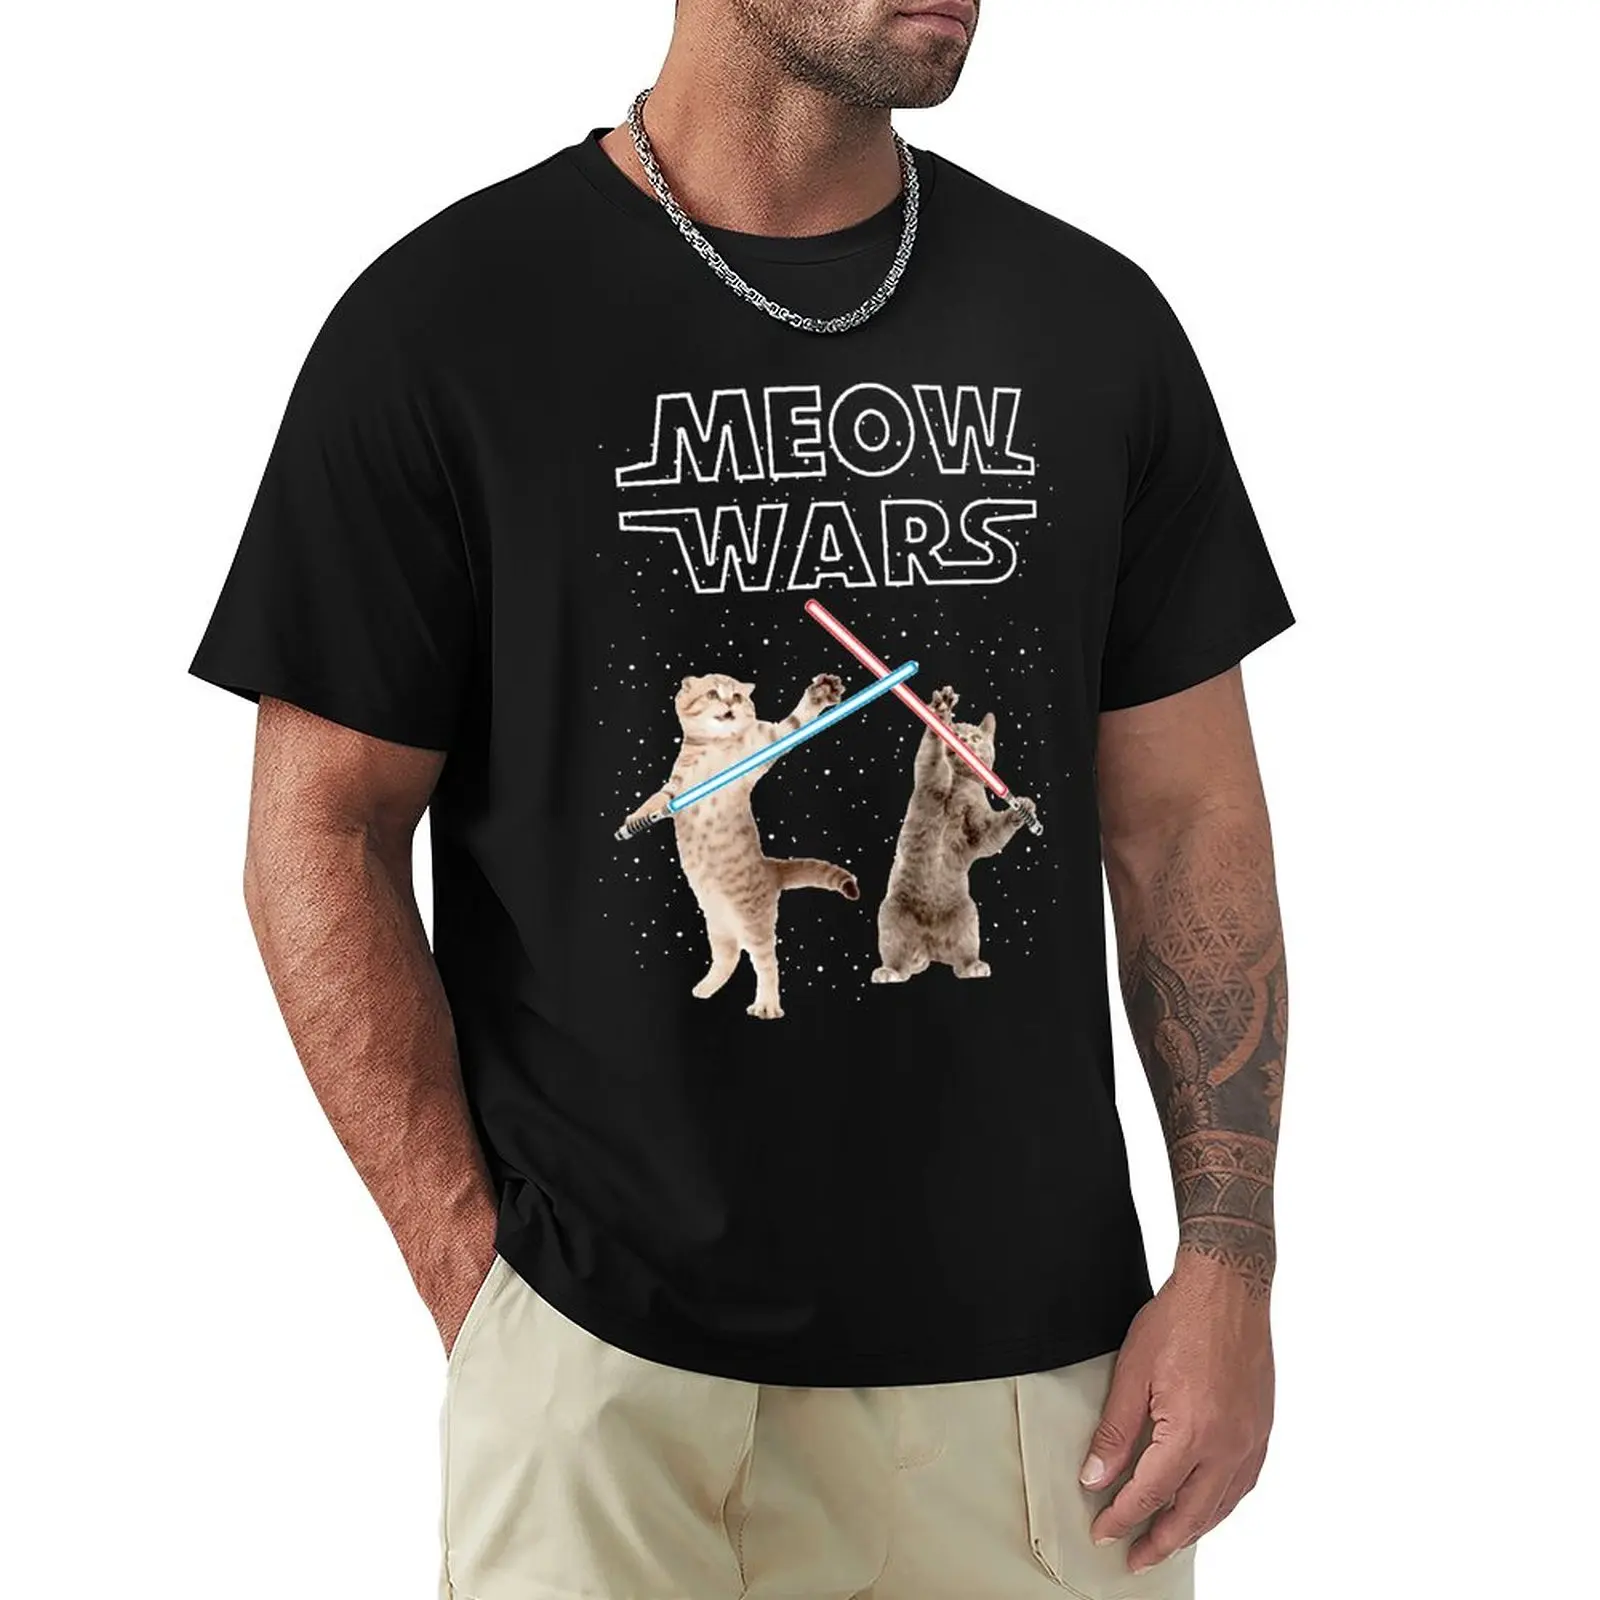 

Meow Wars Cat Funny Gifts For Cat Cats Lovers T Shirt Men Women's Cotton T-Shirt Crew Neck Tees Short Sleeve Clothing Summer